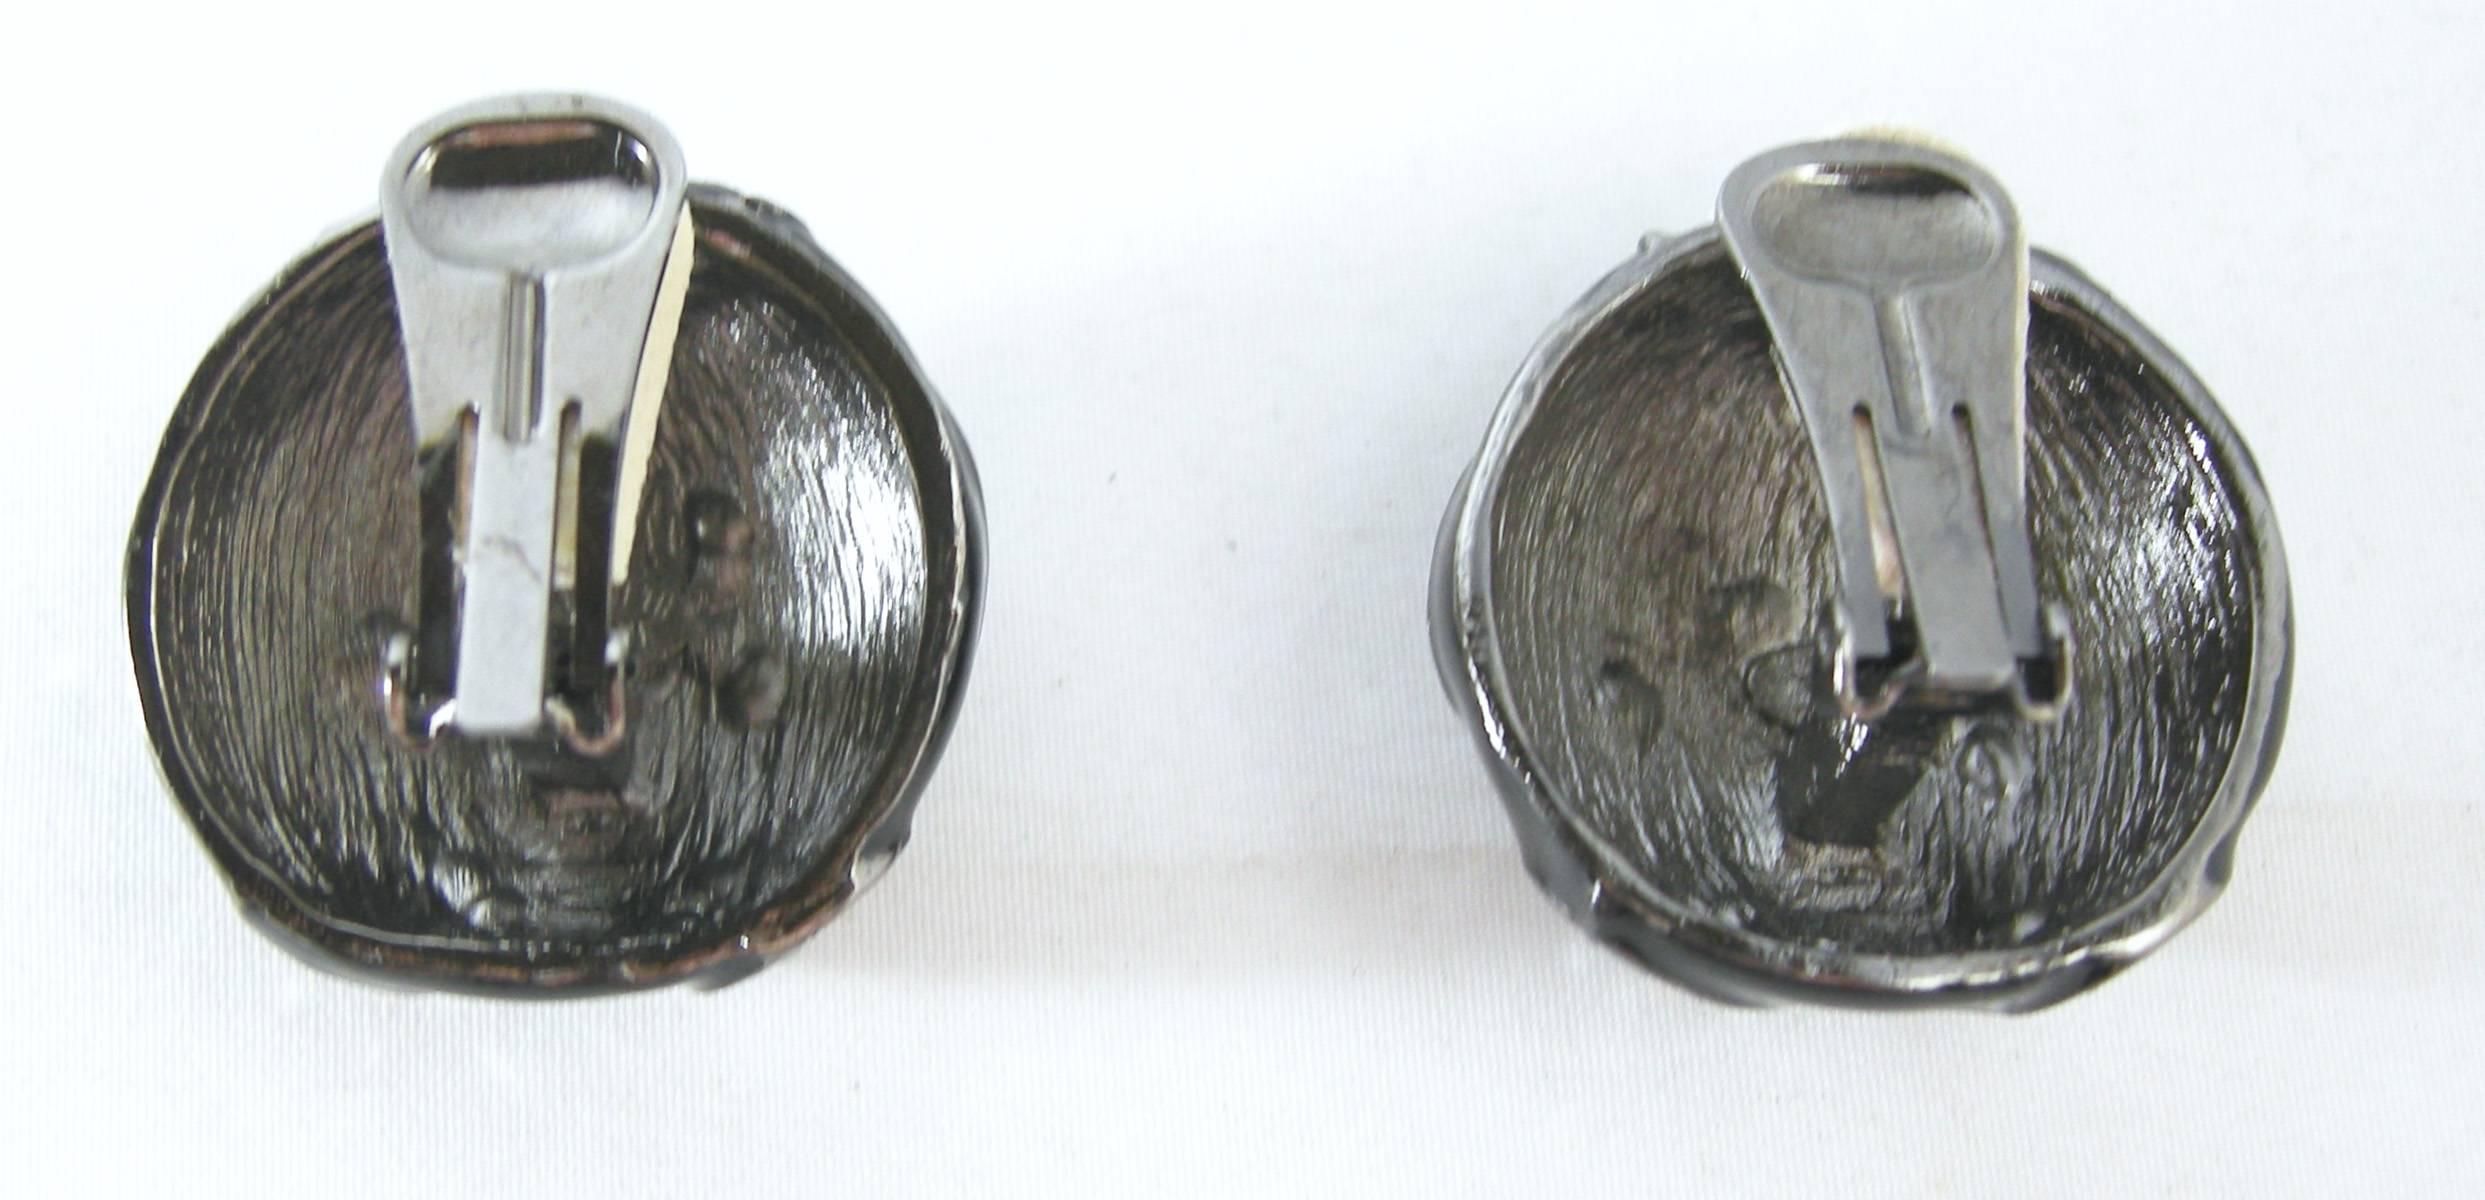 These Kenneth Jay Lane earrings are made with a glossy black enamel with a swirl design of marcasites set in pewter tone finish. They are clip on and measure 1-⅛” x 1-⅛”. They are signed “Kenneth Lane” and are in excellent condition